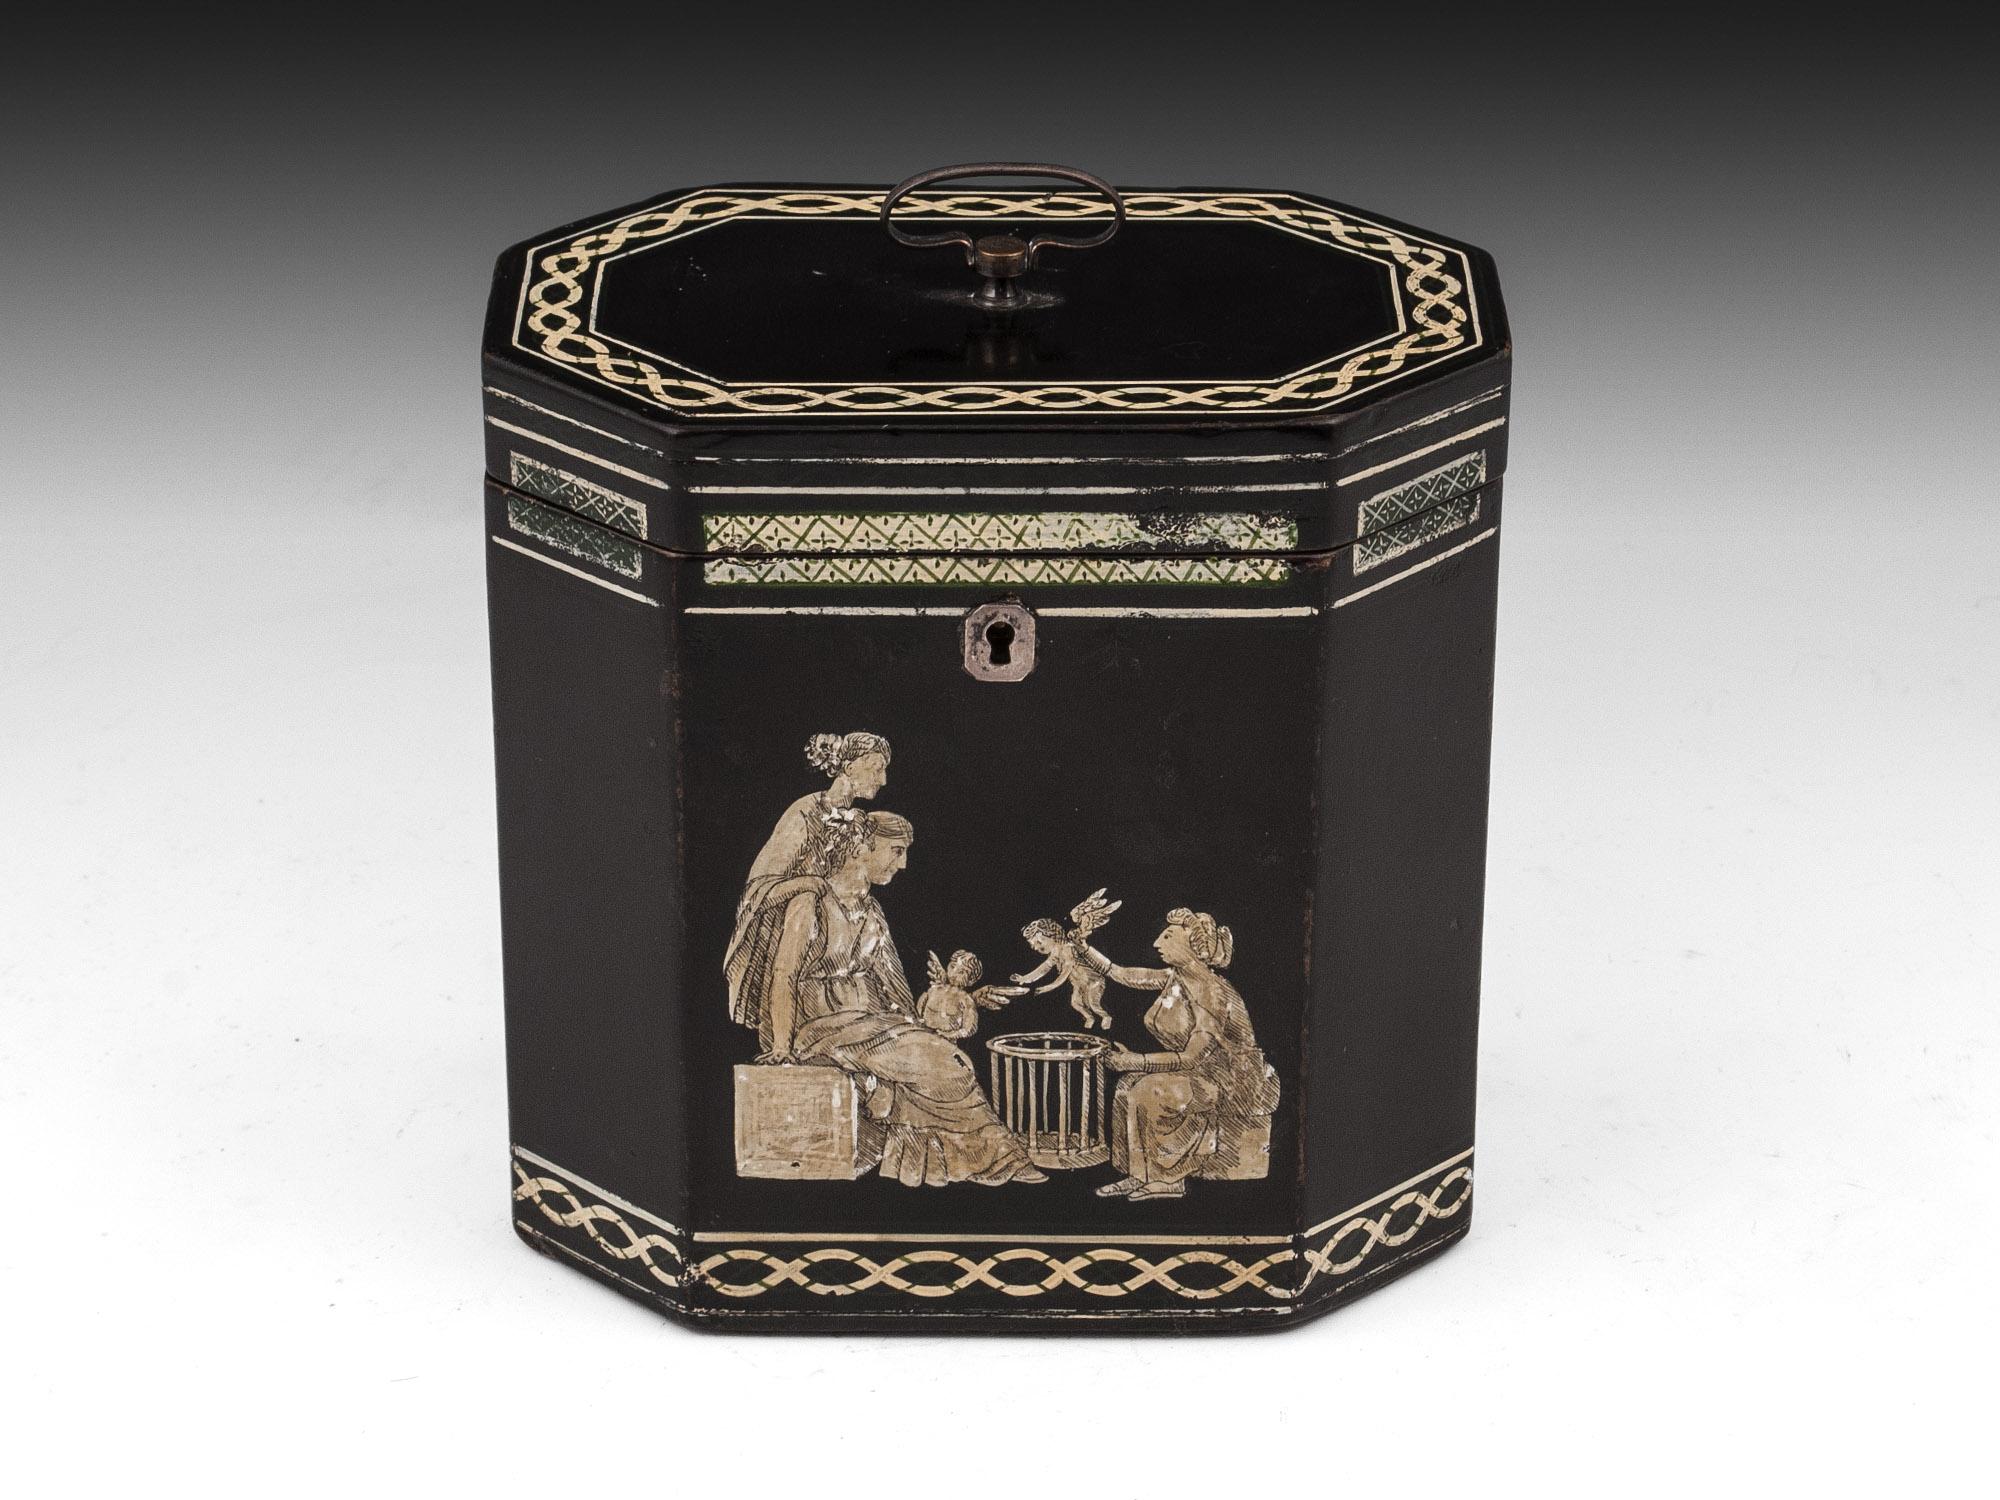 Octagonal Papier-Mache Tea Caddy with Classical Figures Circa 1800

From our Tea Caddy collection, we are thrilled to offer this Henry Clay Octagonal papier-mache Tea Caddy. The Tea caddy decorated to the exterior with a central scene showing